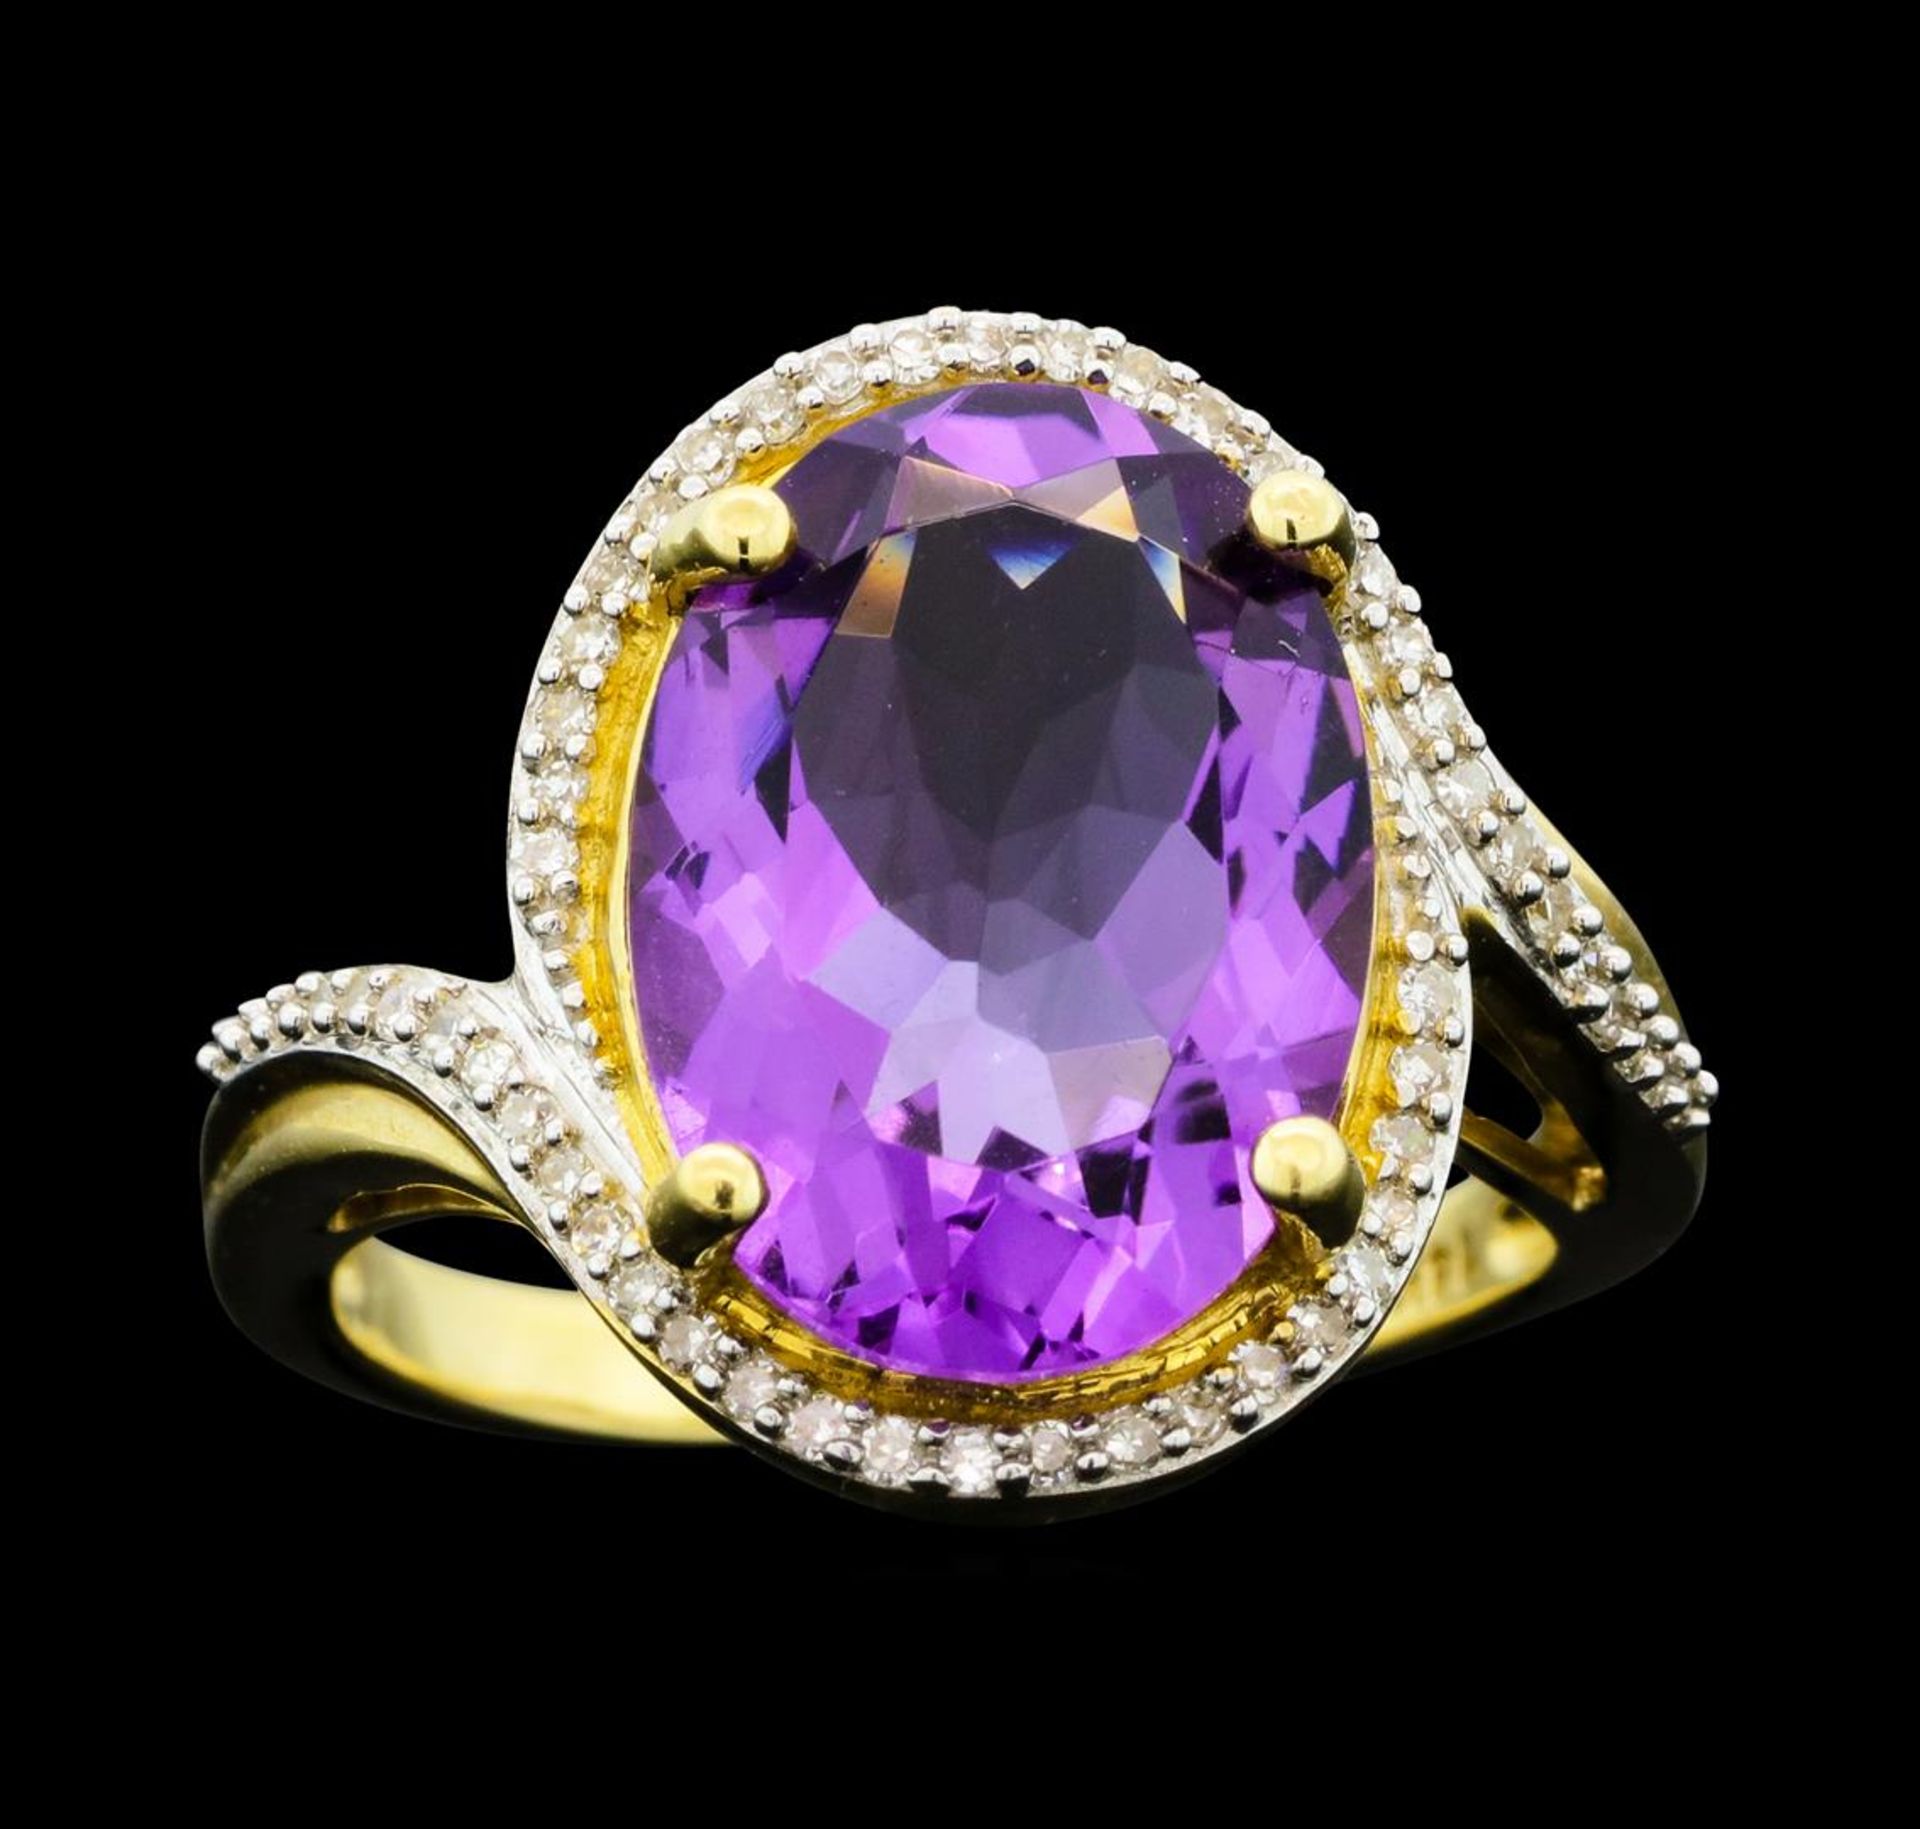 4.90 ct Amethyst And Diamond Ring - 14KT Yellow Gold - Image 2 of 5